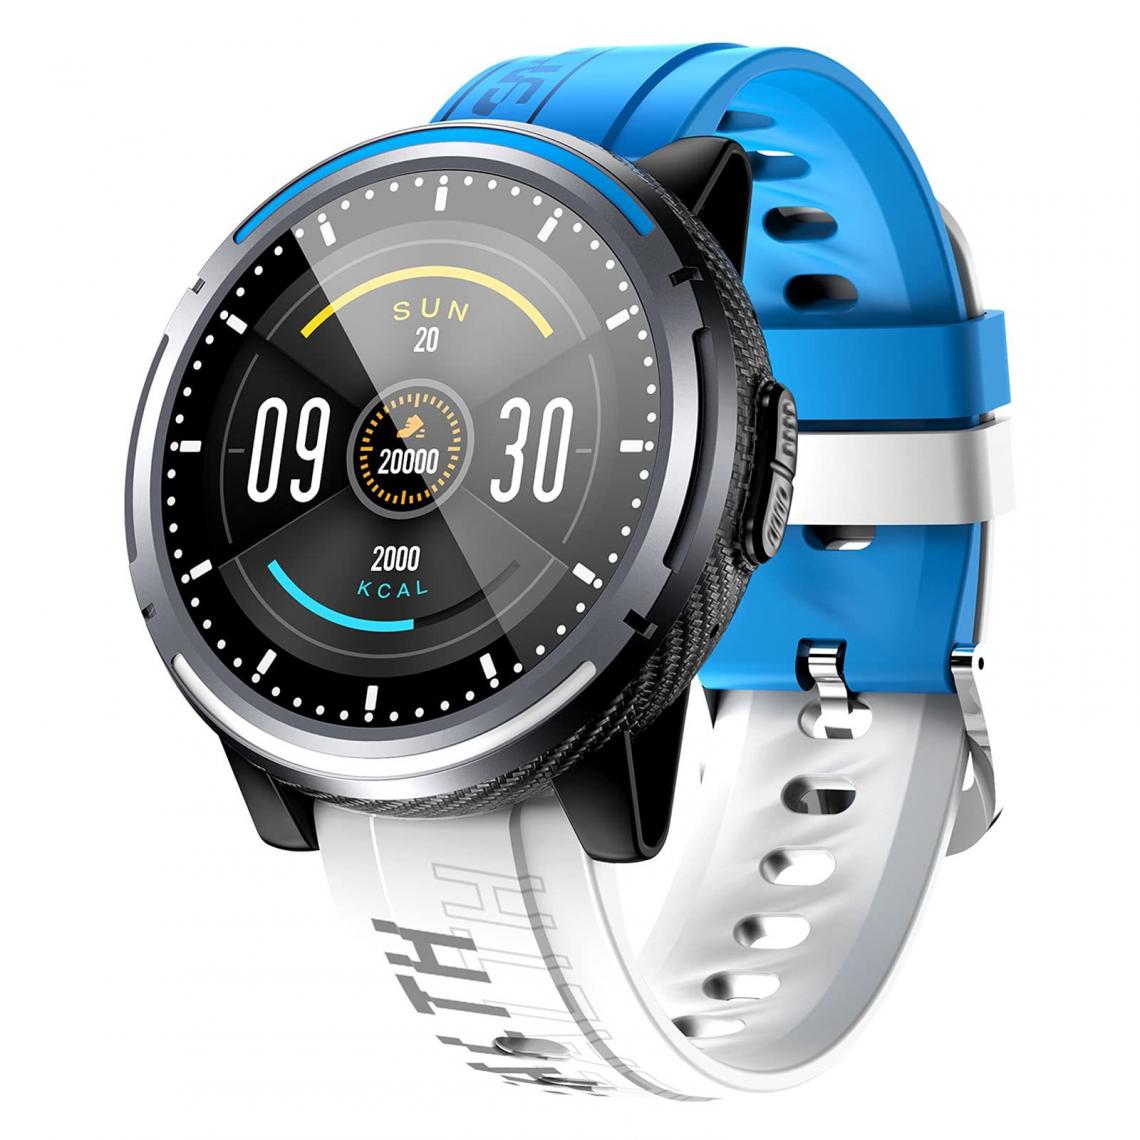 Chronotech Montres - Chronus Bluetooth Call Smart Watch 1.28 Inch Music Play Message Reminder Multiple Sports Mode Fitness Tracker Sports Bracelet Ip67 Waterproof Fitness Smart Watch(Blue) - Montre connectée